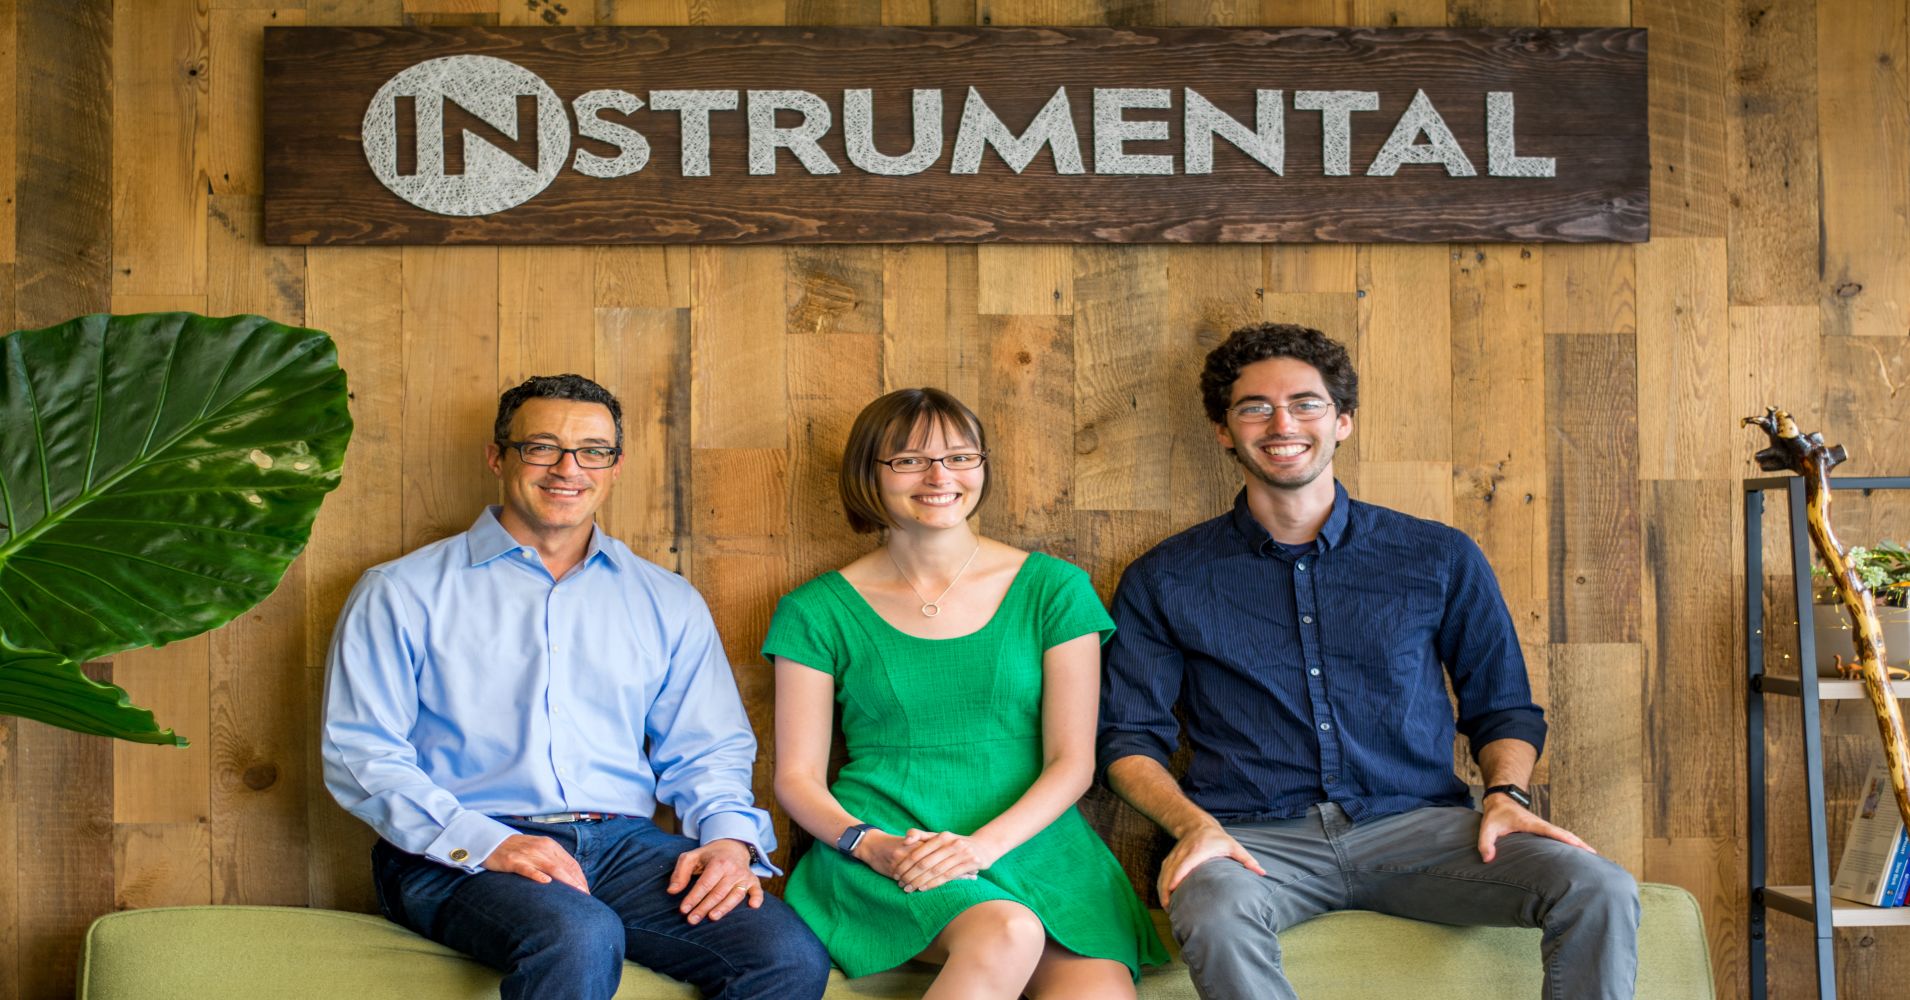 Instrumental COO Keith Lucas, CEO Anna Shedletsky and CTO Sam Weiss